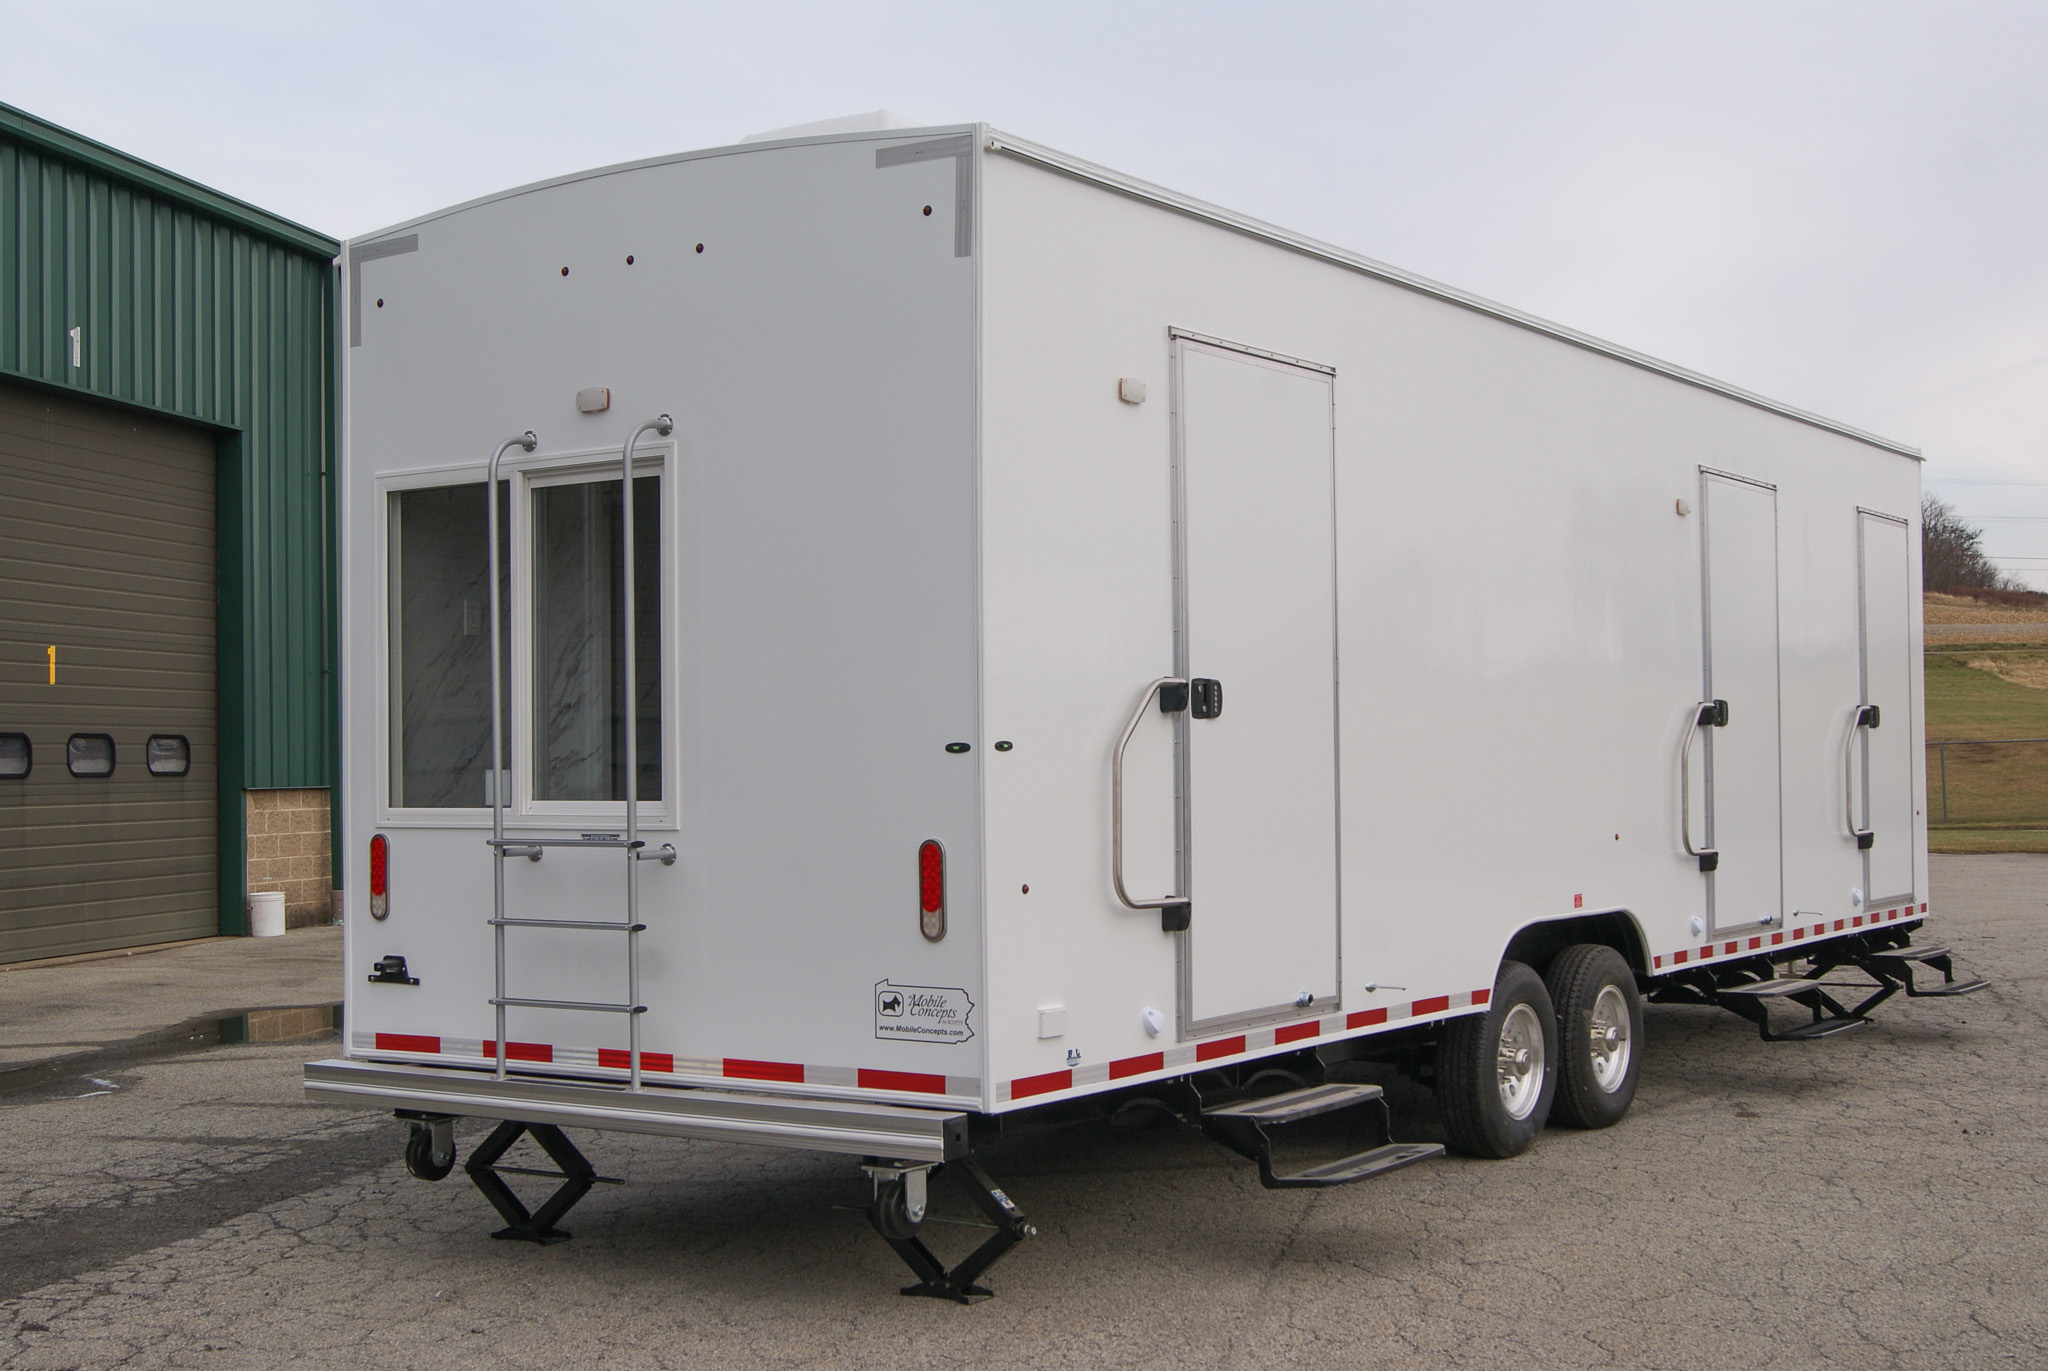 A rear view of the #NextGen Fire Safety House made for Travis County, TX.